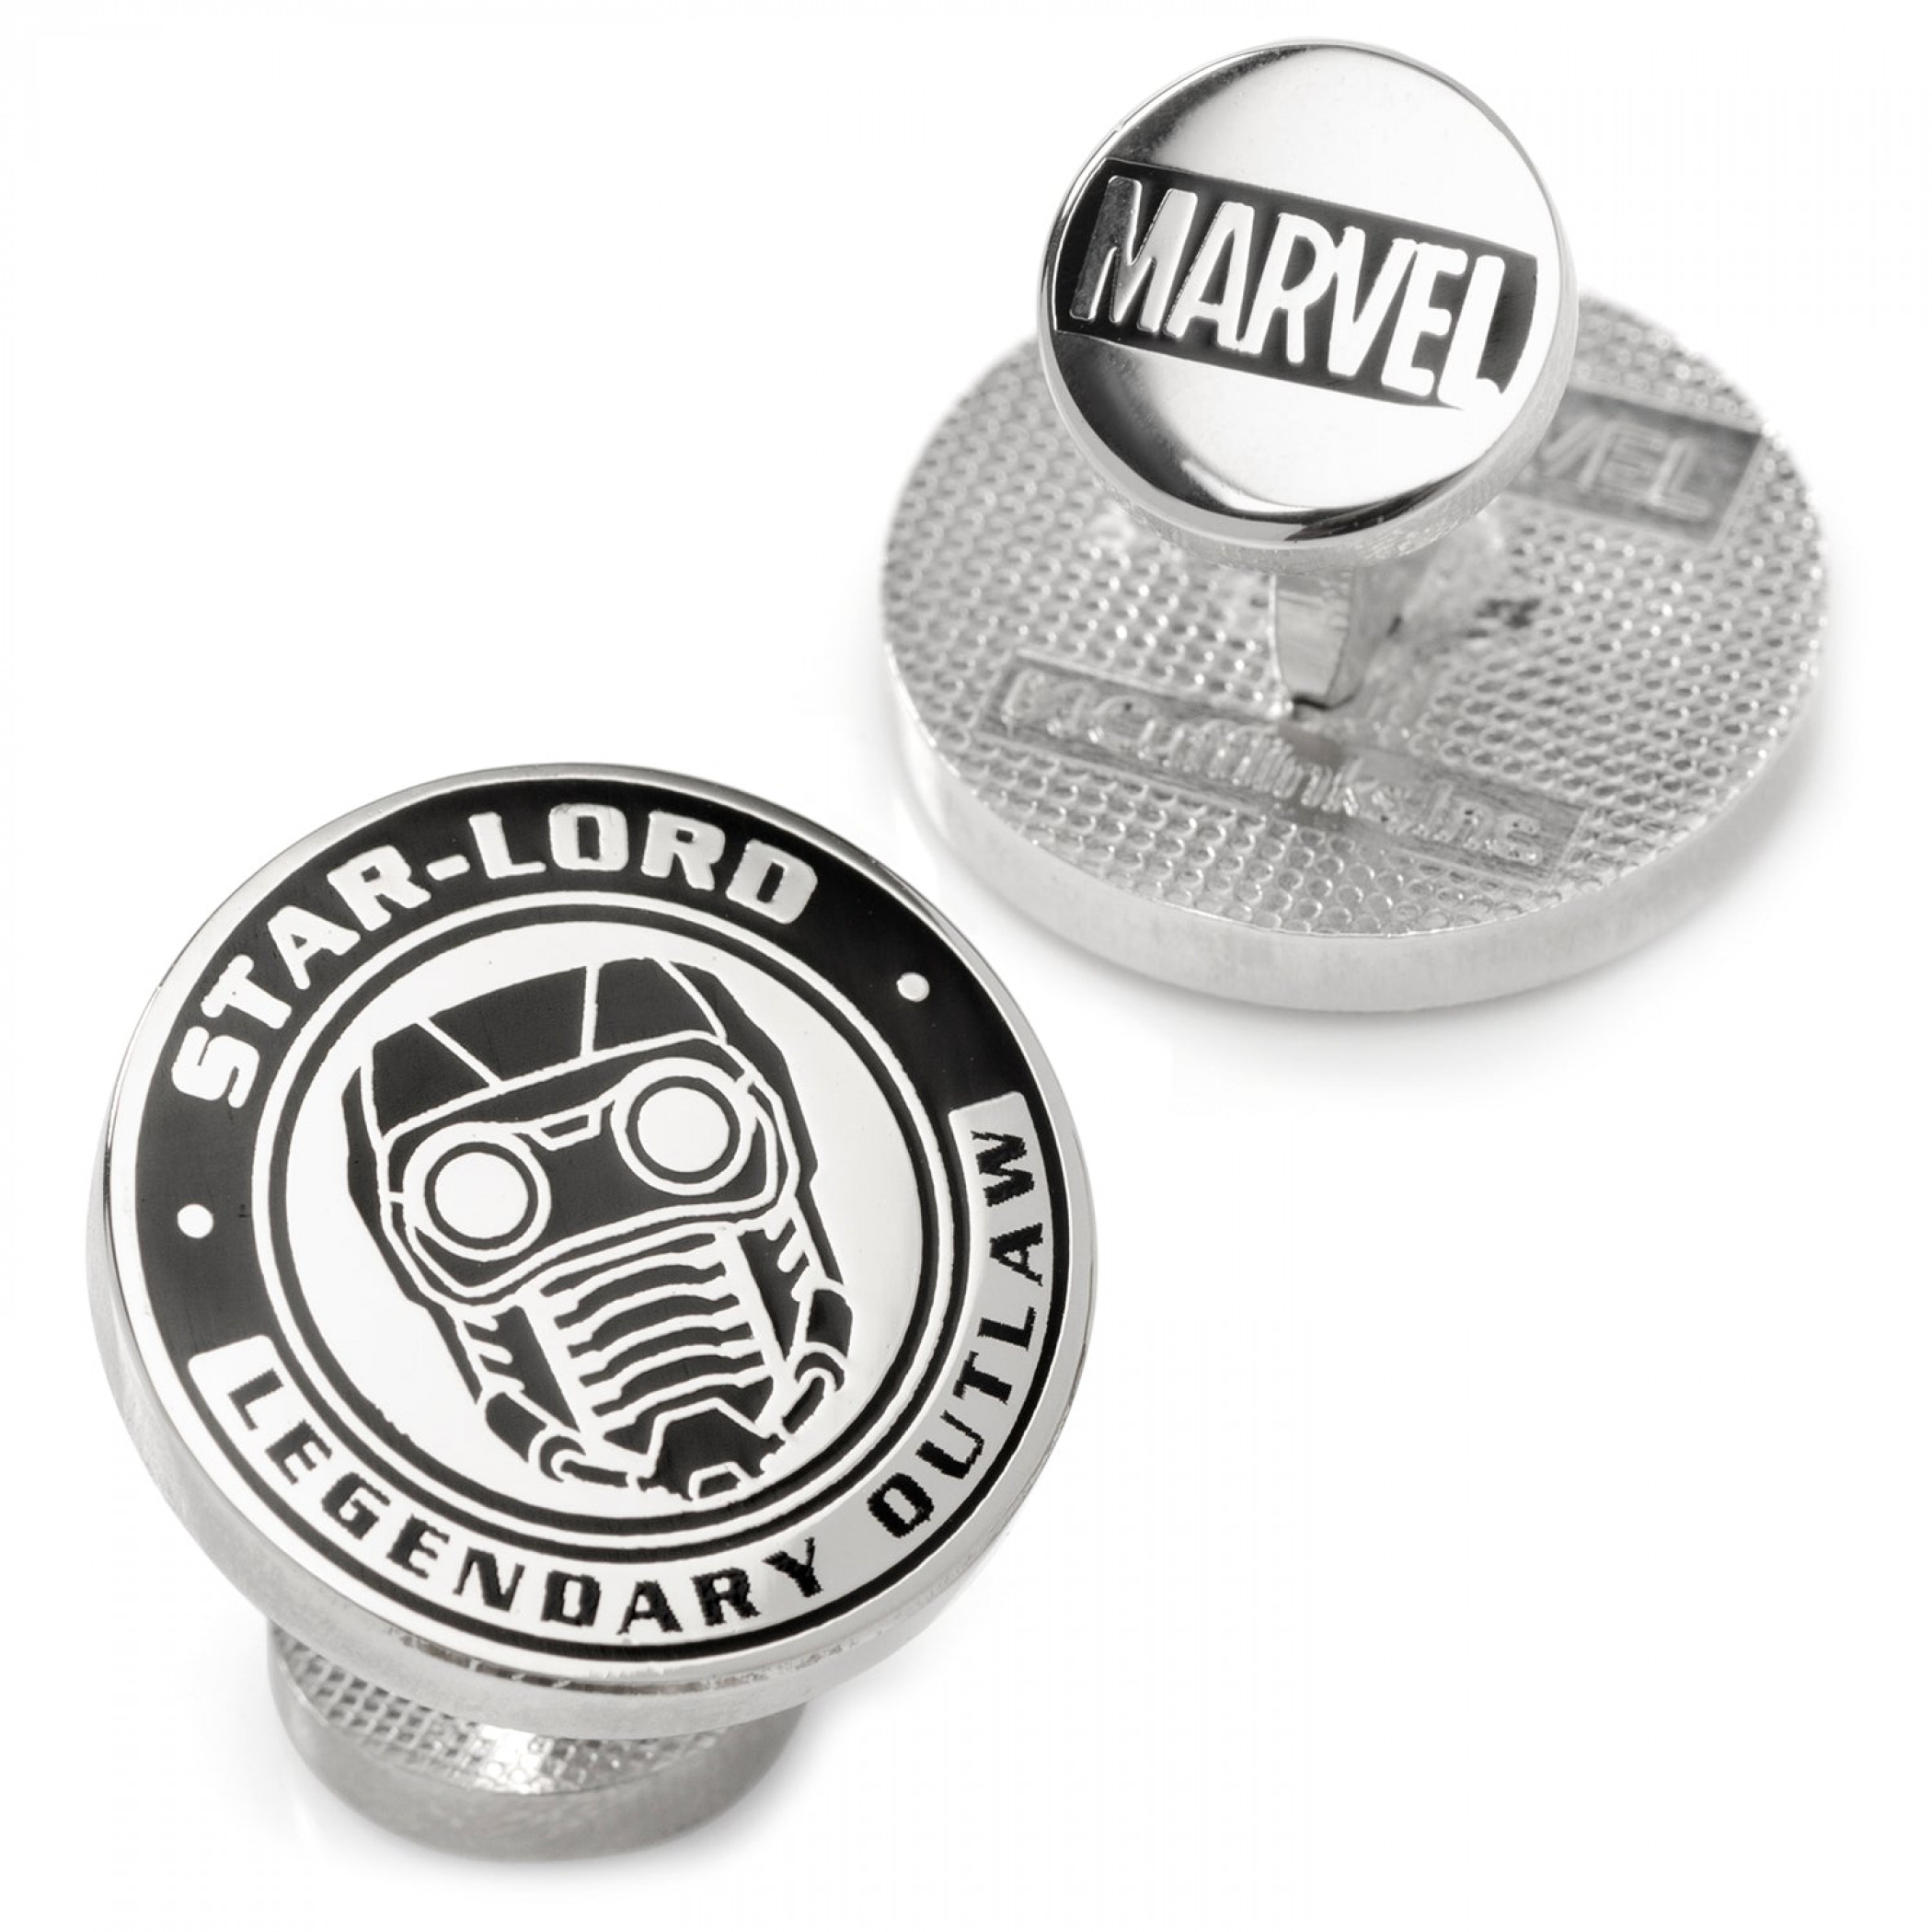 Guardians of The Galaxy Starlord Legendary Outlaw Cufflinks